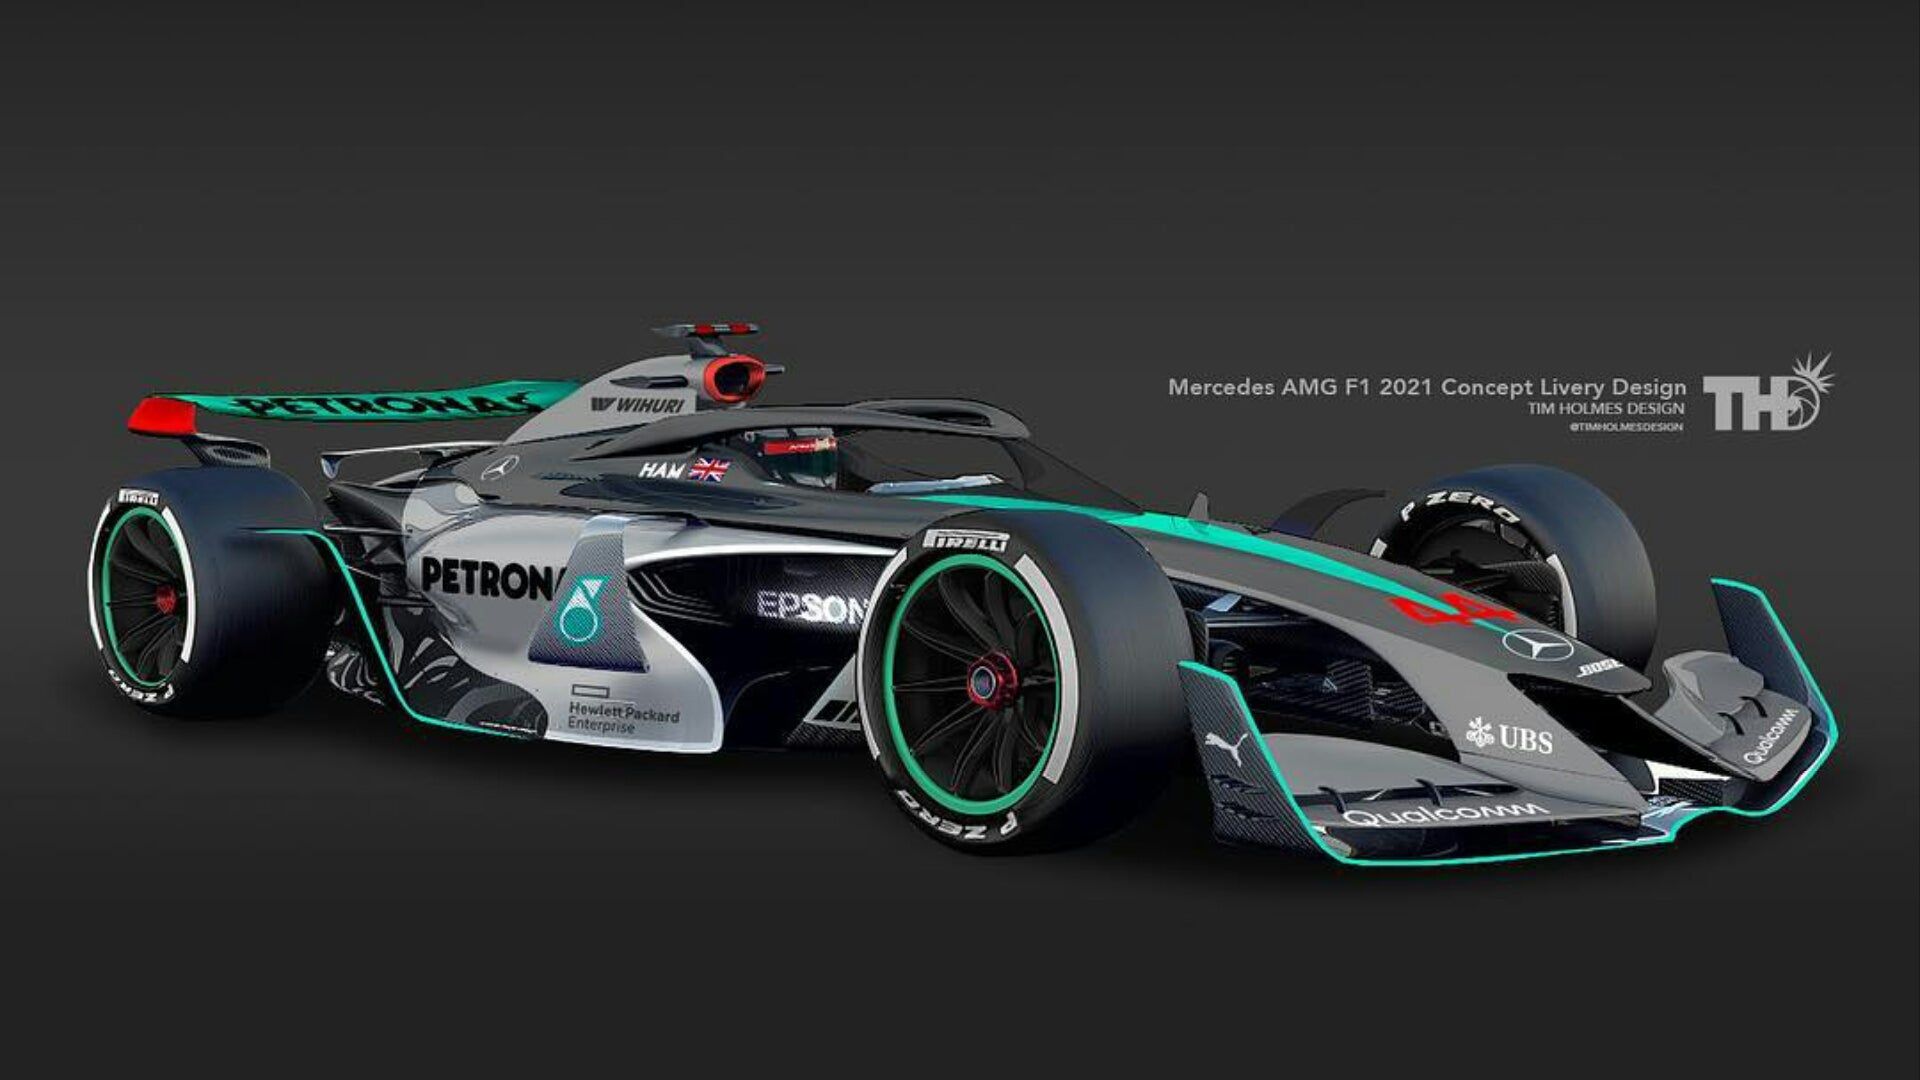 What do you think about the 2021 F1 cars??